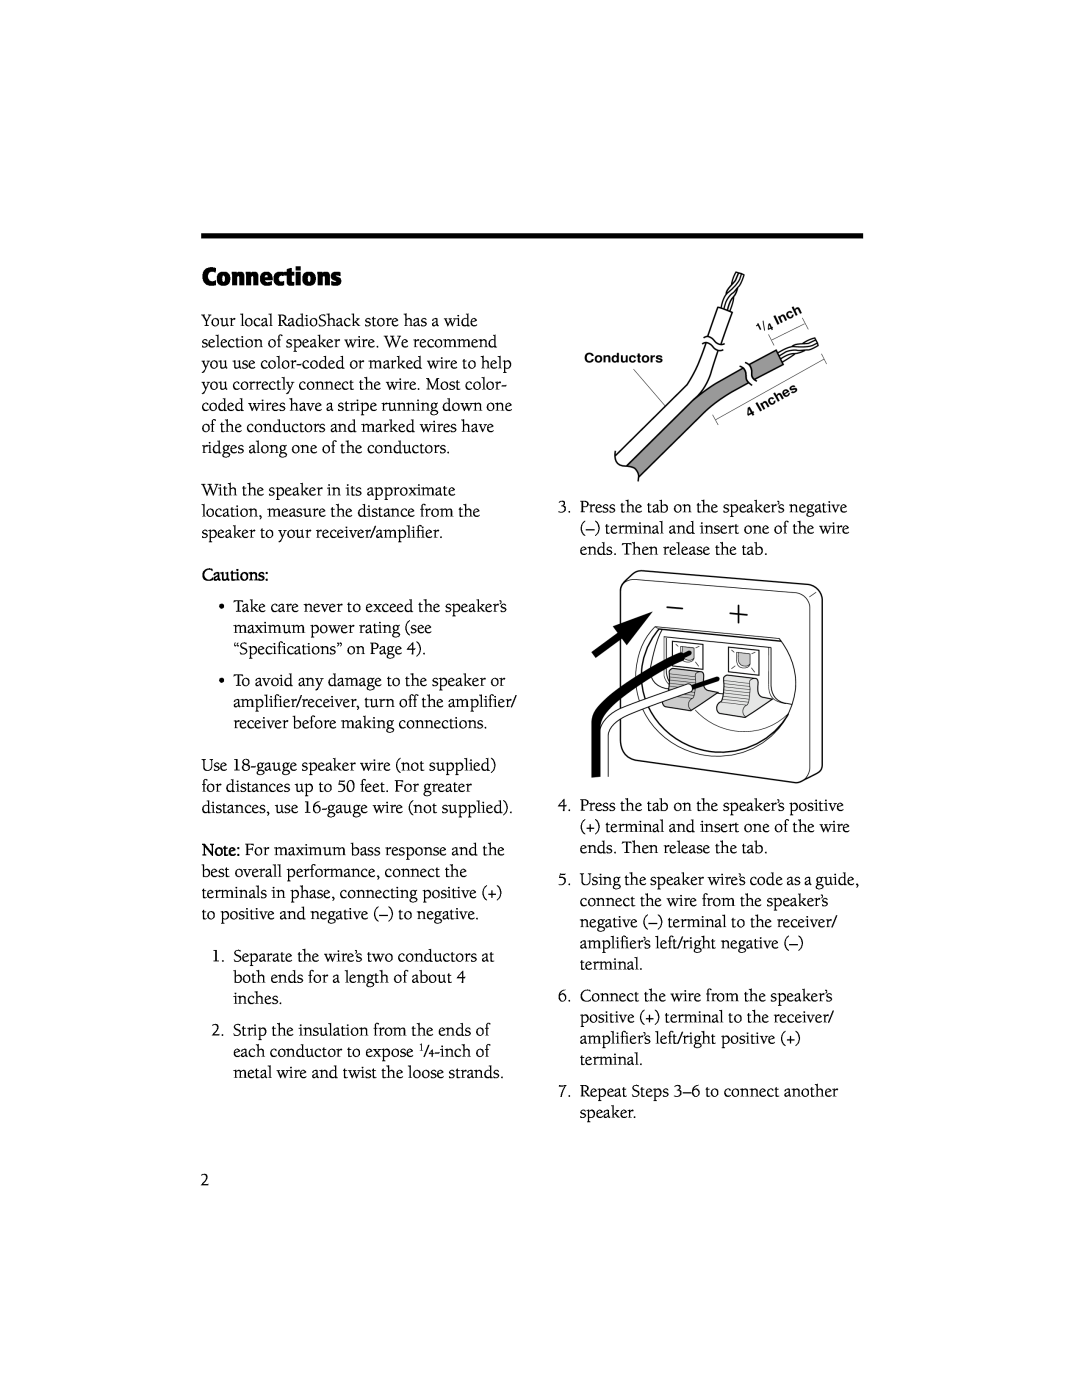 Radio Shack STS-520 manual Connections, Cautions 